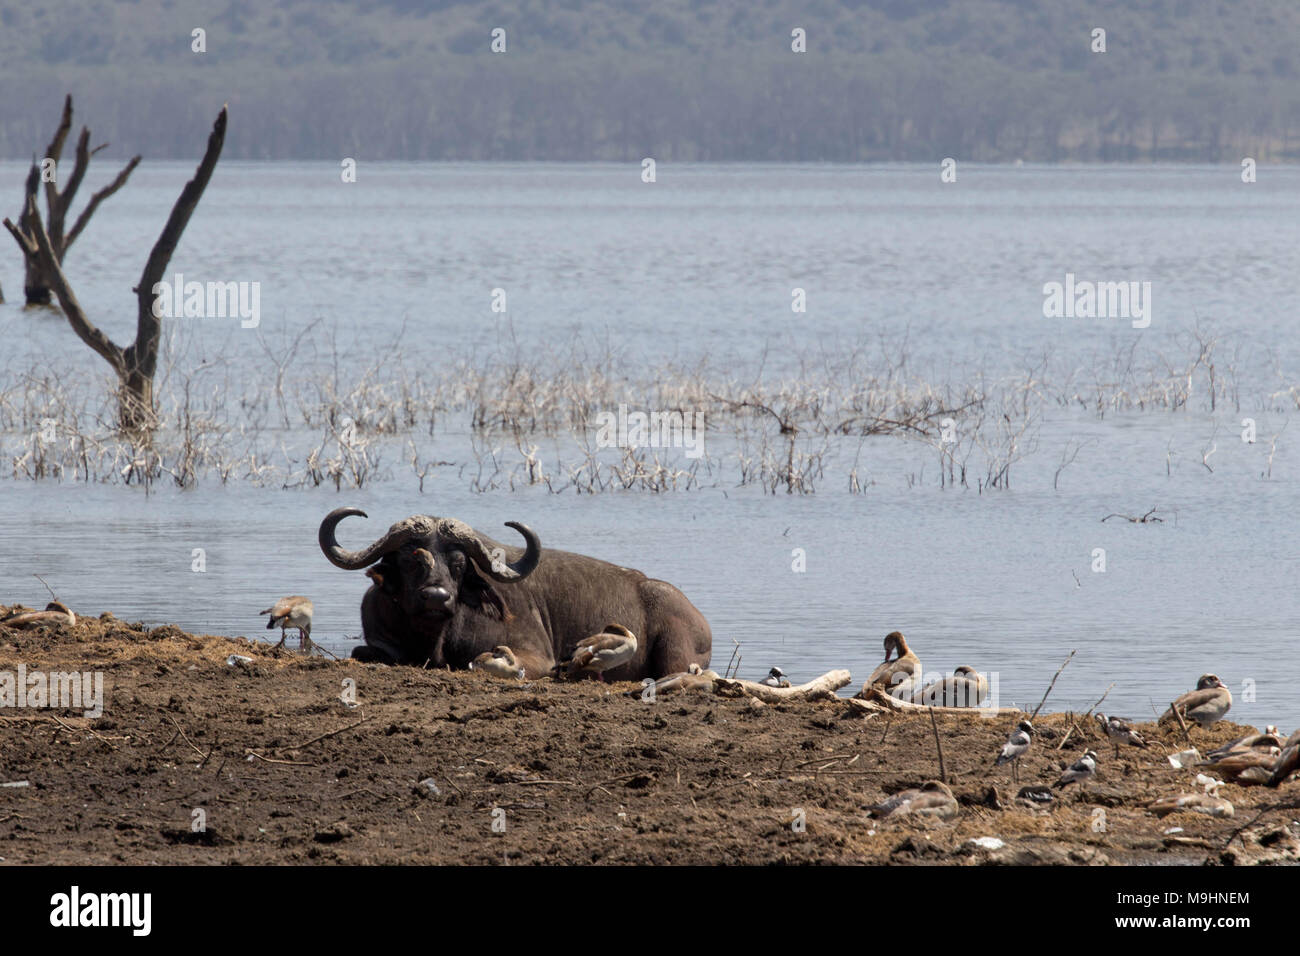 African Buffalo lying next to Lake Shore surrounded by Ducks Stock Photo